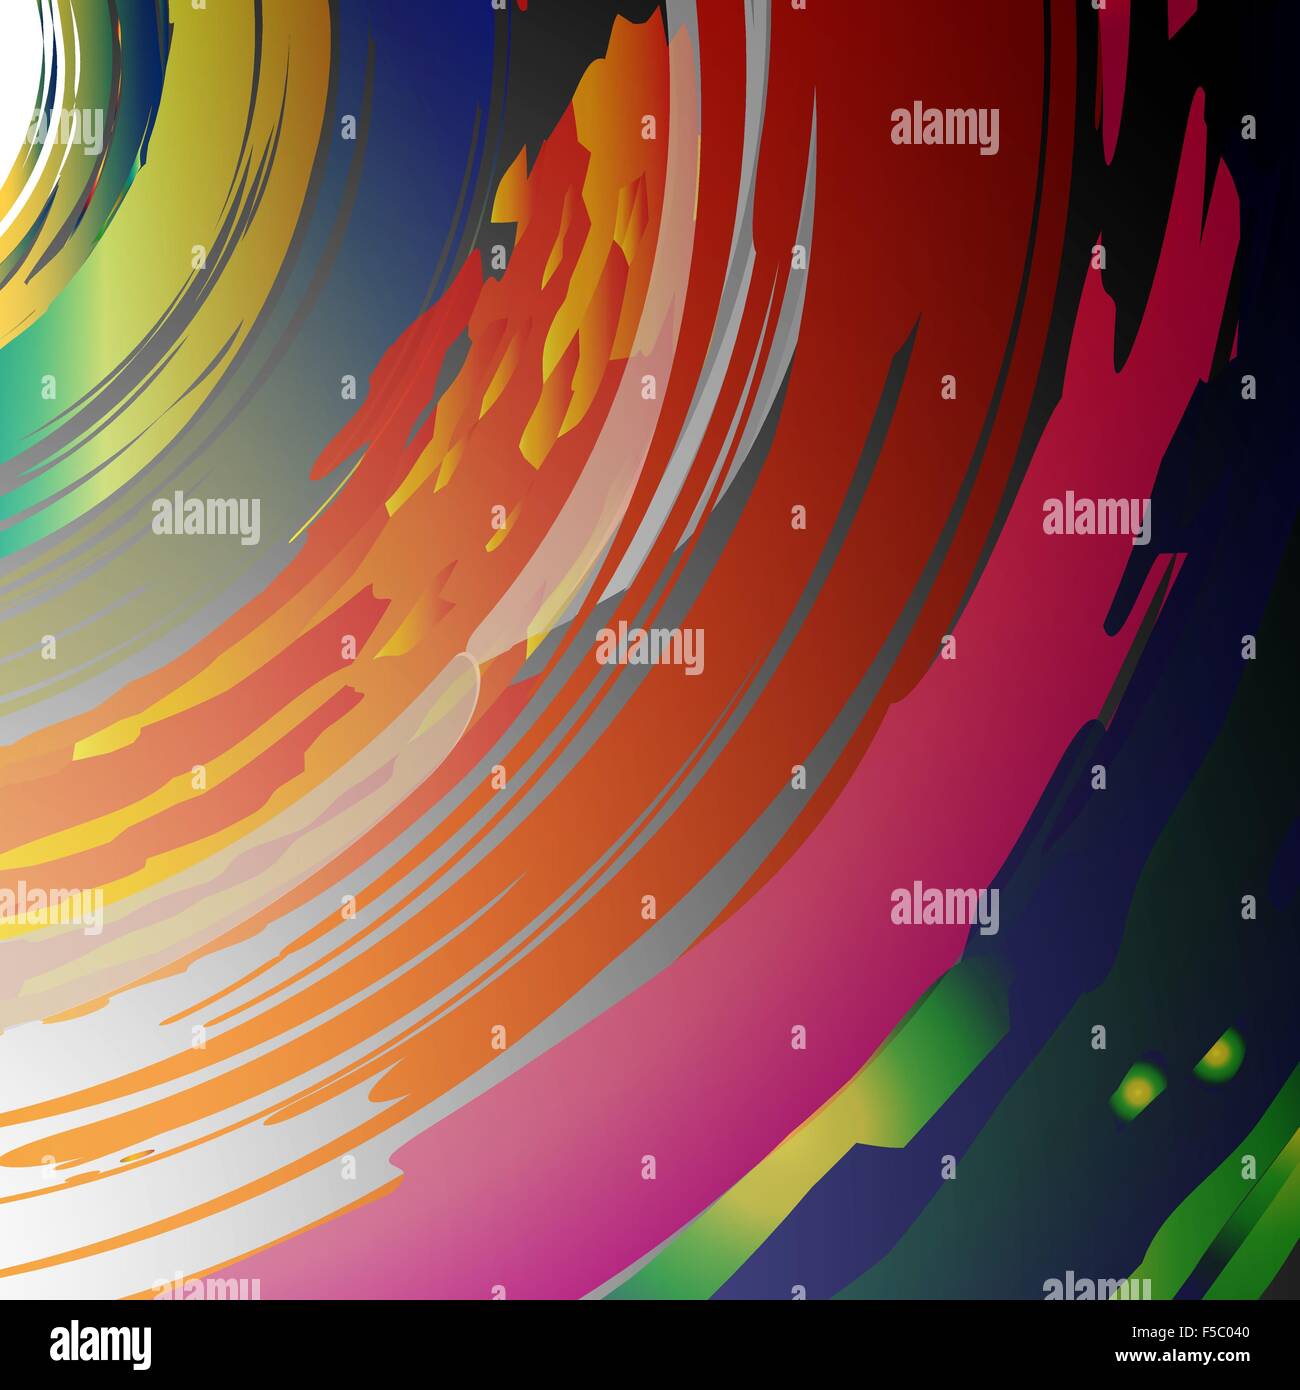 Colorful grunge background.Vector Stock Vector